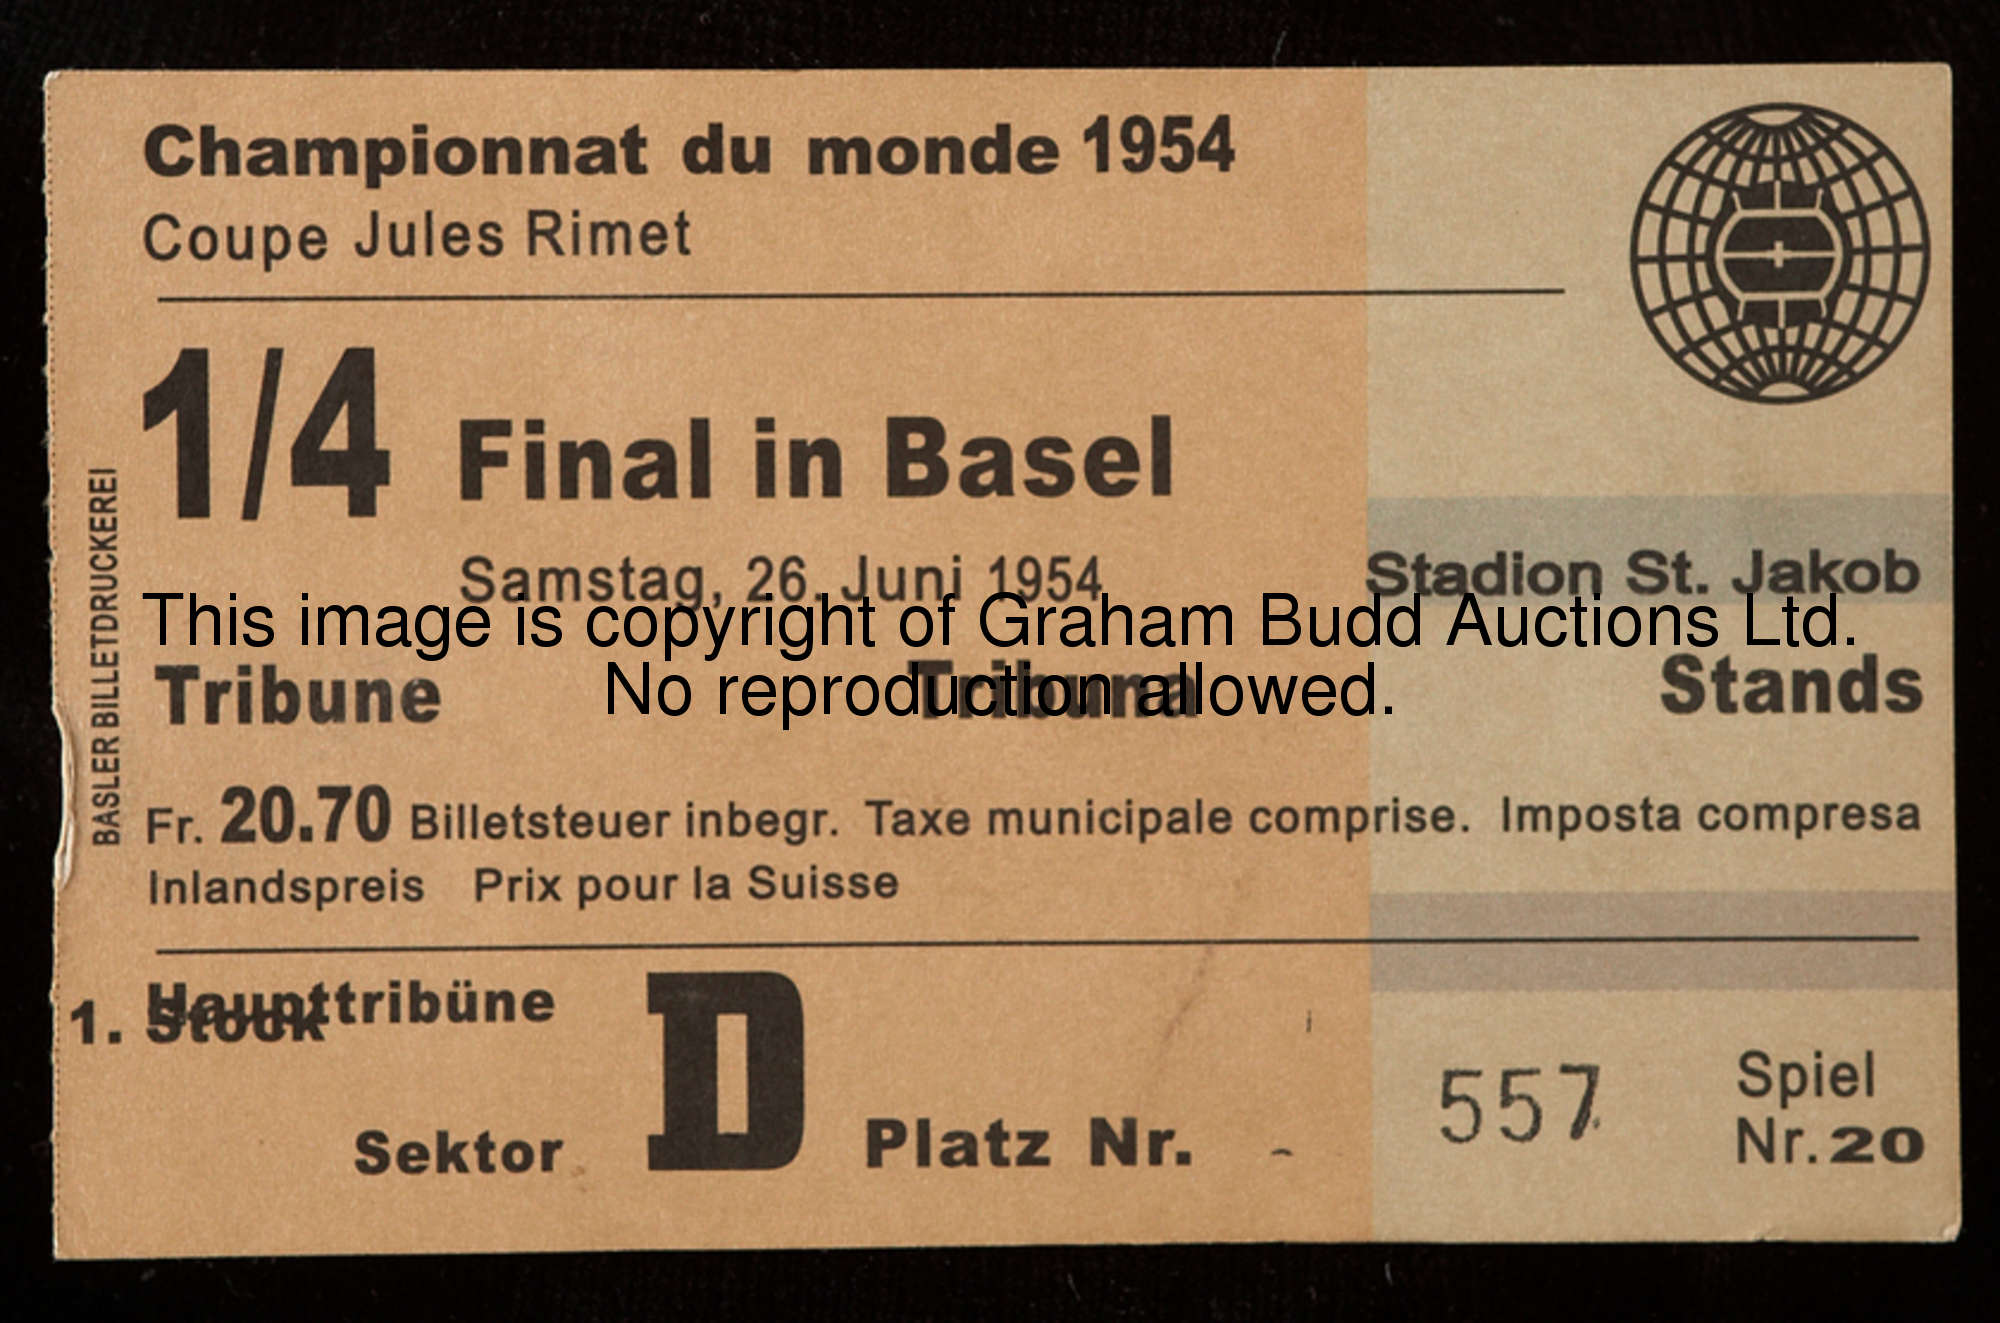 A ticket for the England v Uruguay World Cup quarter-final match played at the St. Jakob Stadium, Be...